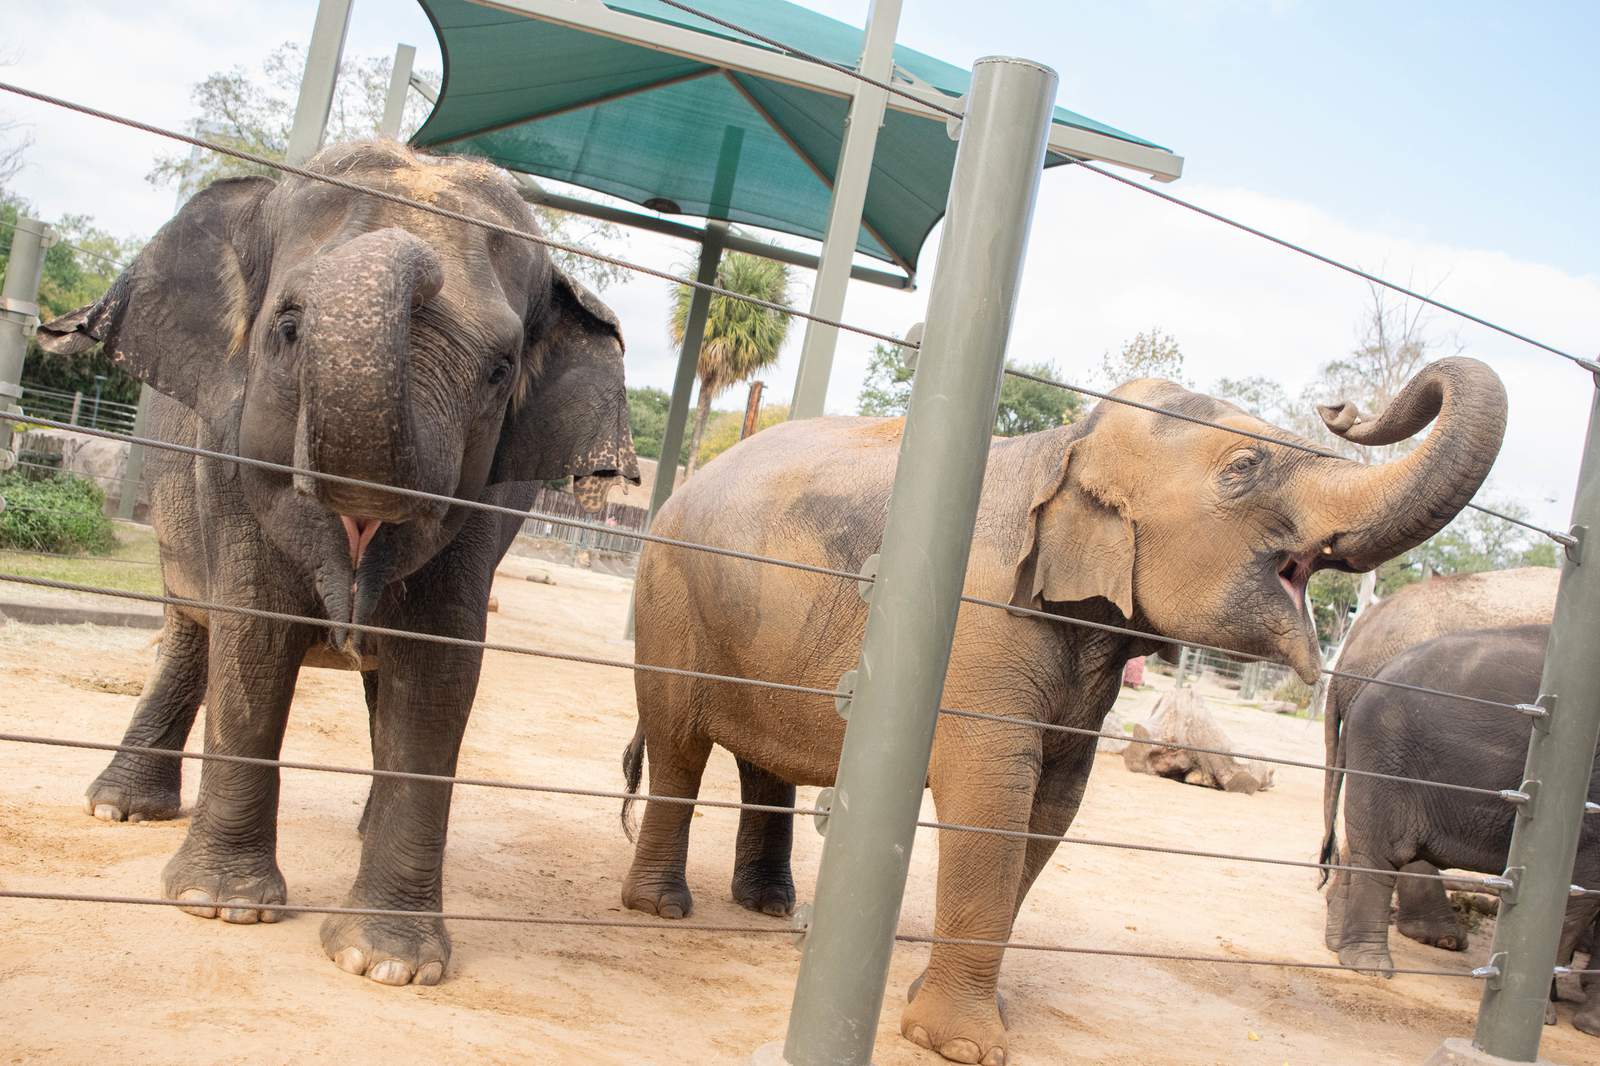 Houston Zoo prepares for birth of two baby Asian elephants this spring